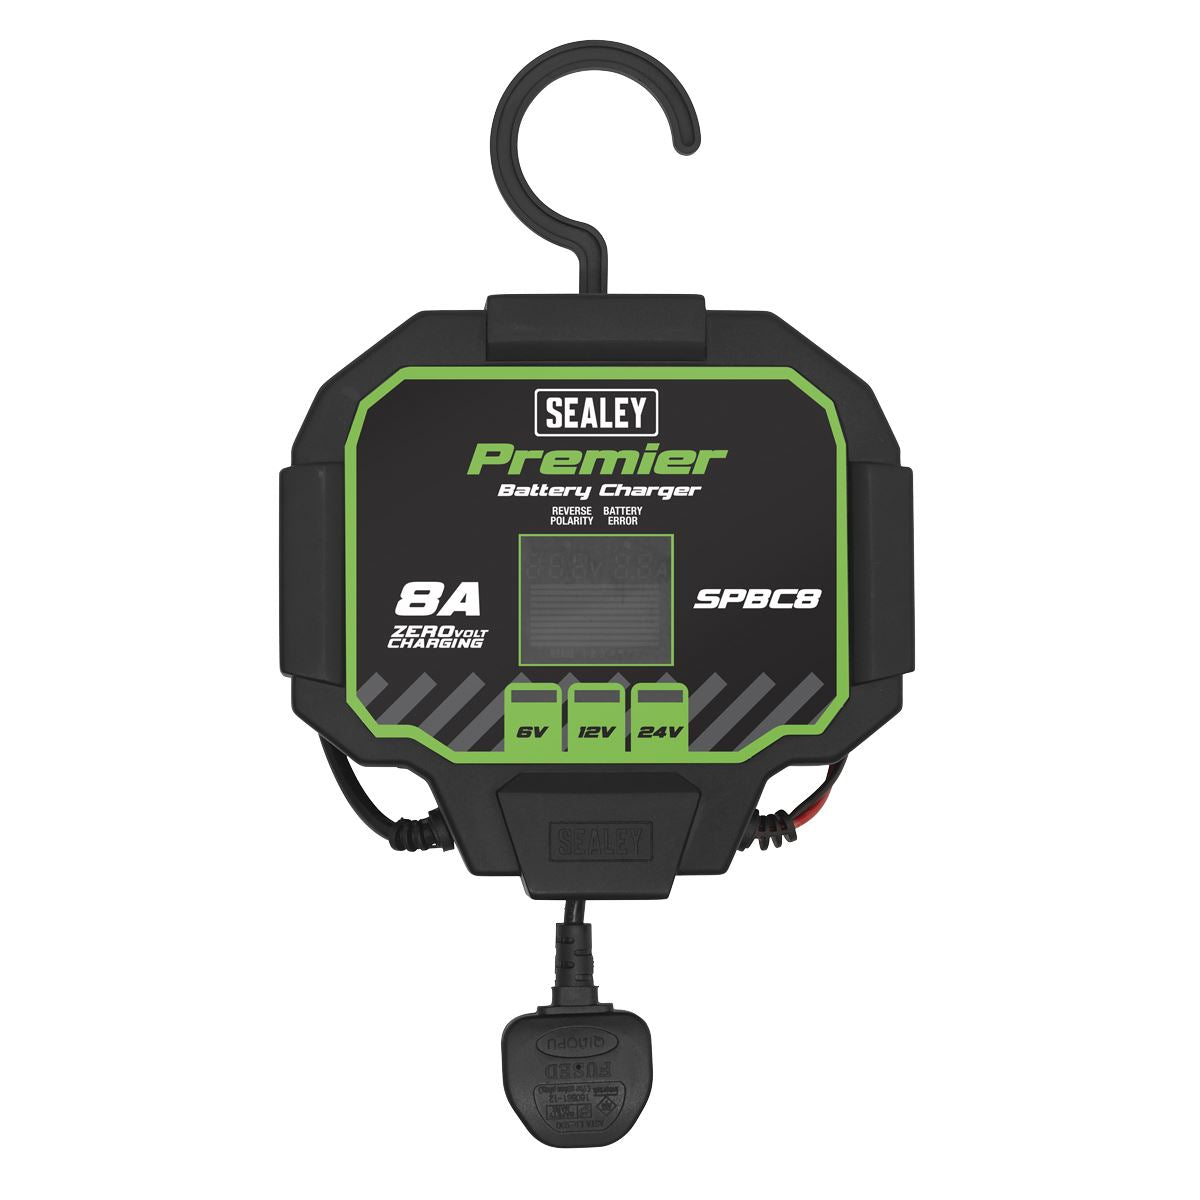 Sealey Premier Battery Maintainer Charger 8A Fully Automatic